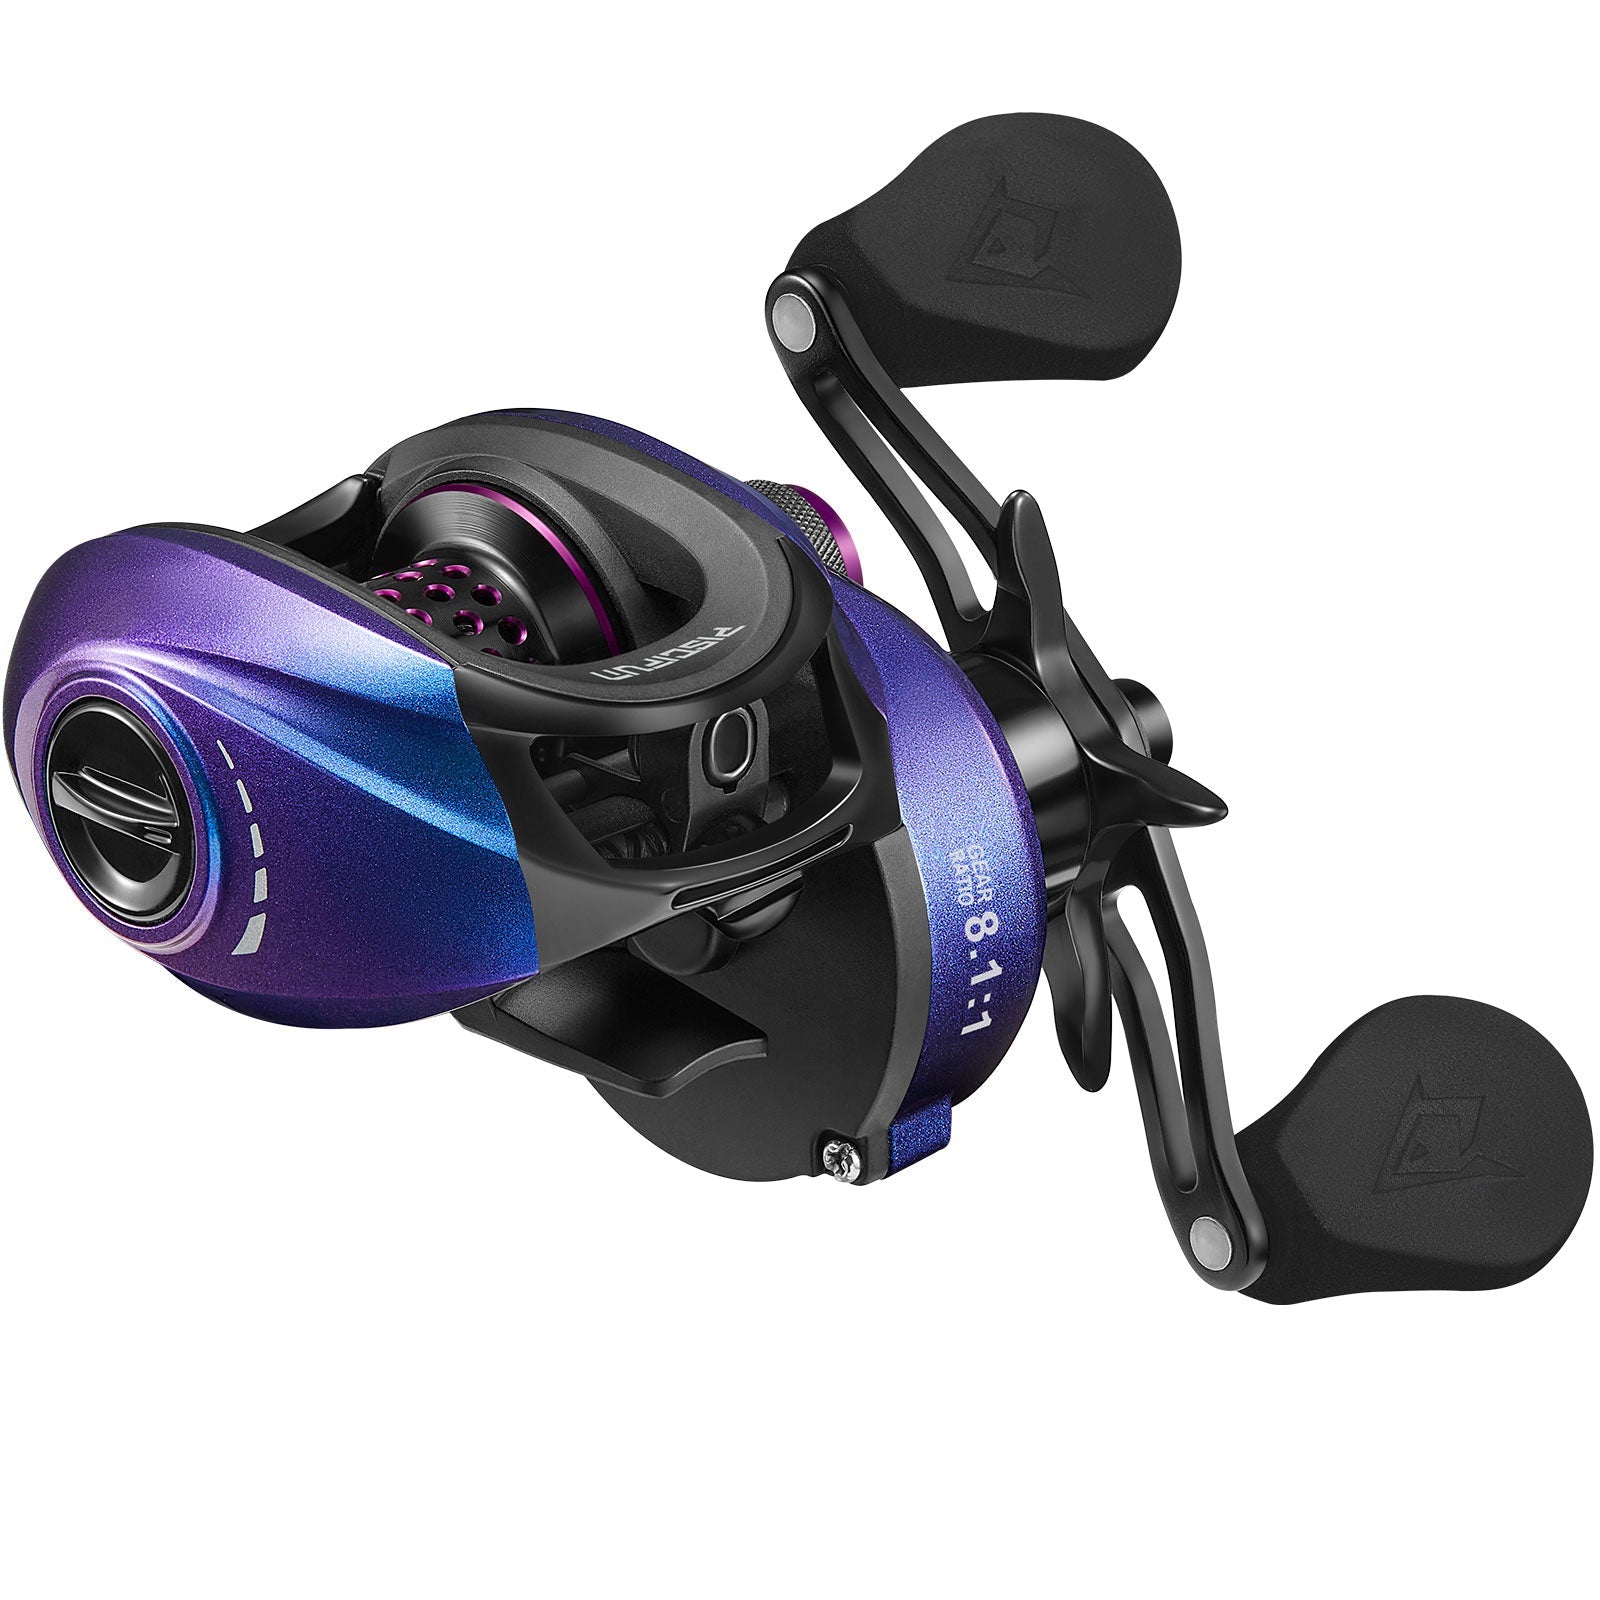 The ongoing hunt for good Chinese OEM reels: The Piscifun Spark